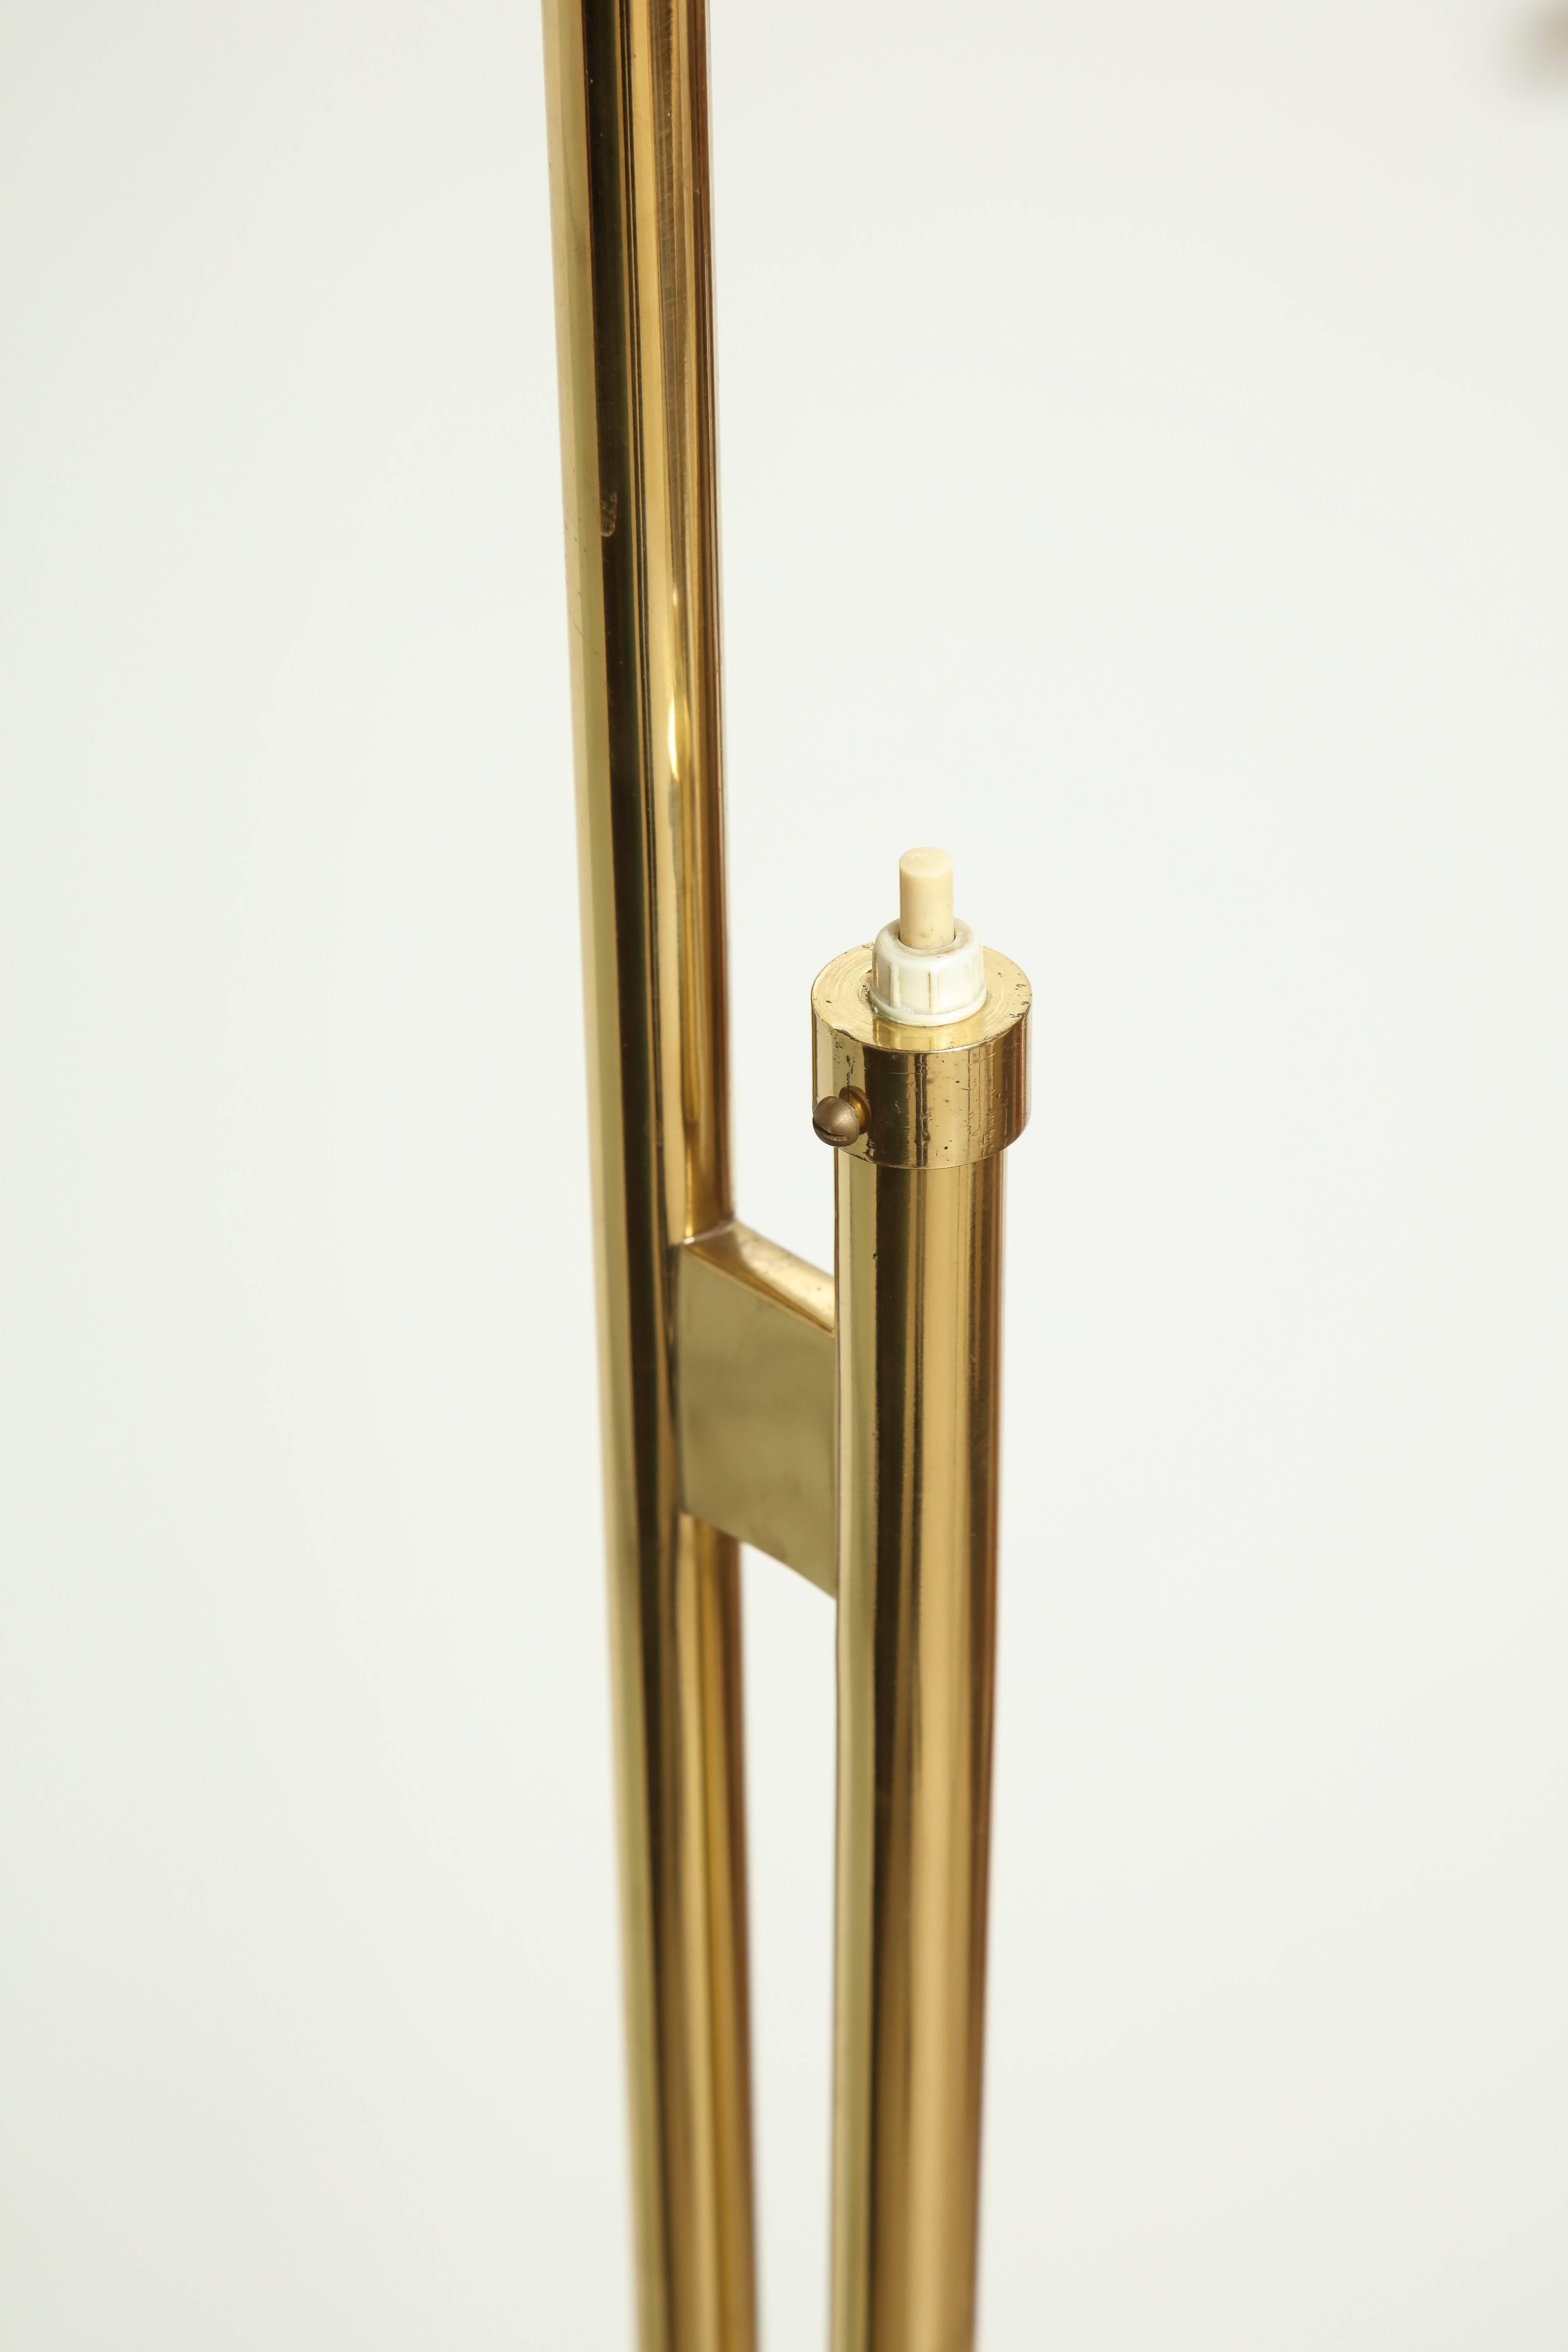 Hand-Crafted Oscar Torlasco Floor Lamp, Made by Lumi in Italy, 1955 For Sale